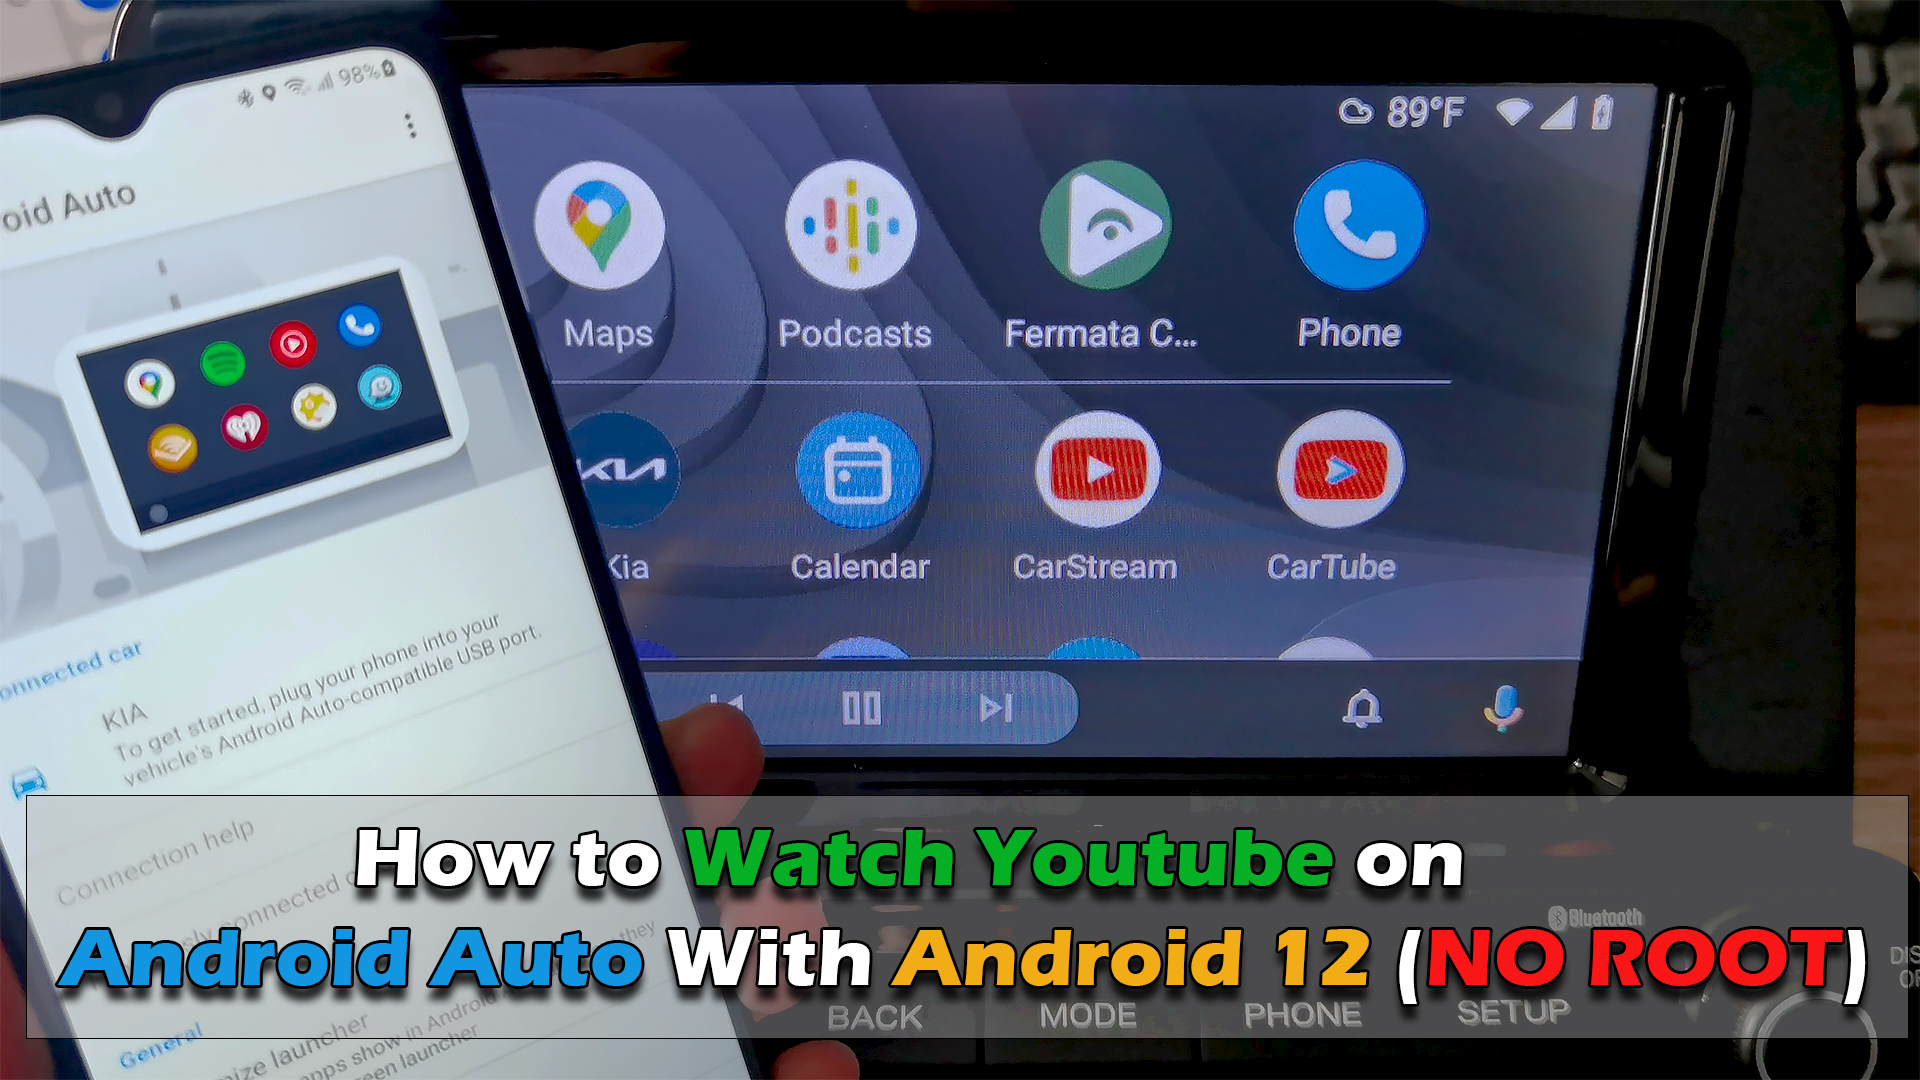 Watch Youtube on Android Auto With Android 12 (NO ROOT) - ICTfix